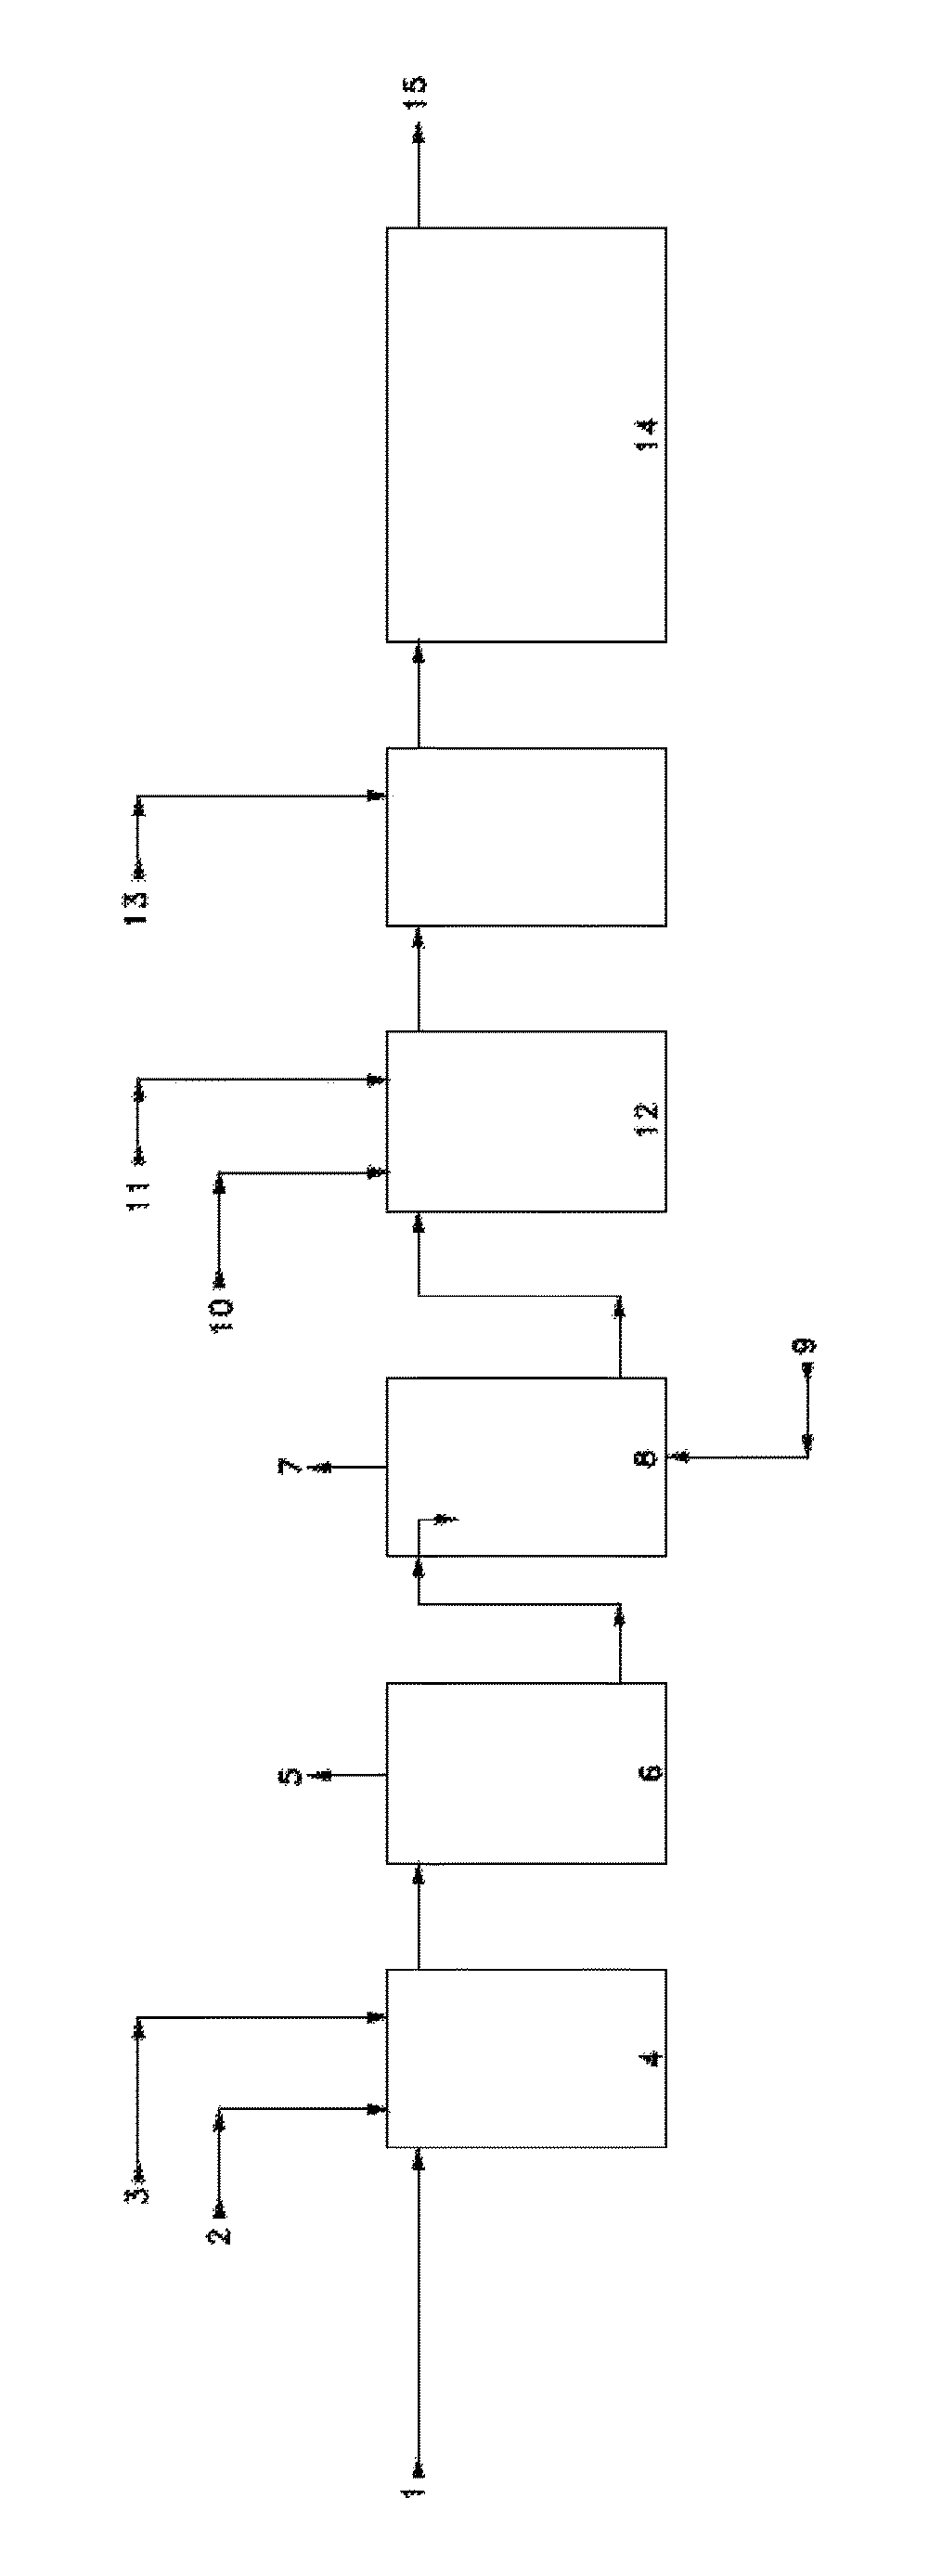 Process for treating waste water utilizing an agitated liquid and electrically conductive environment and electro chemical cell